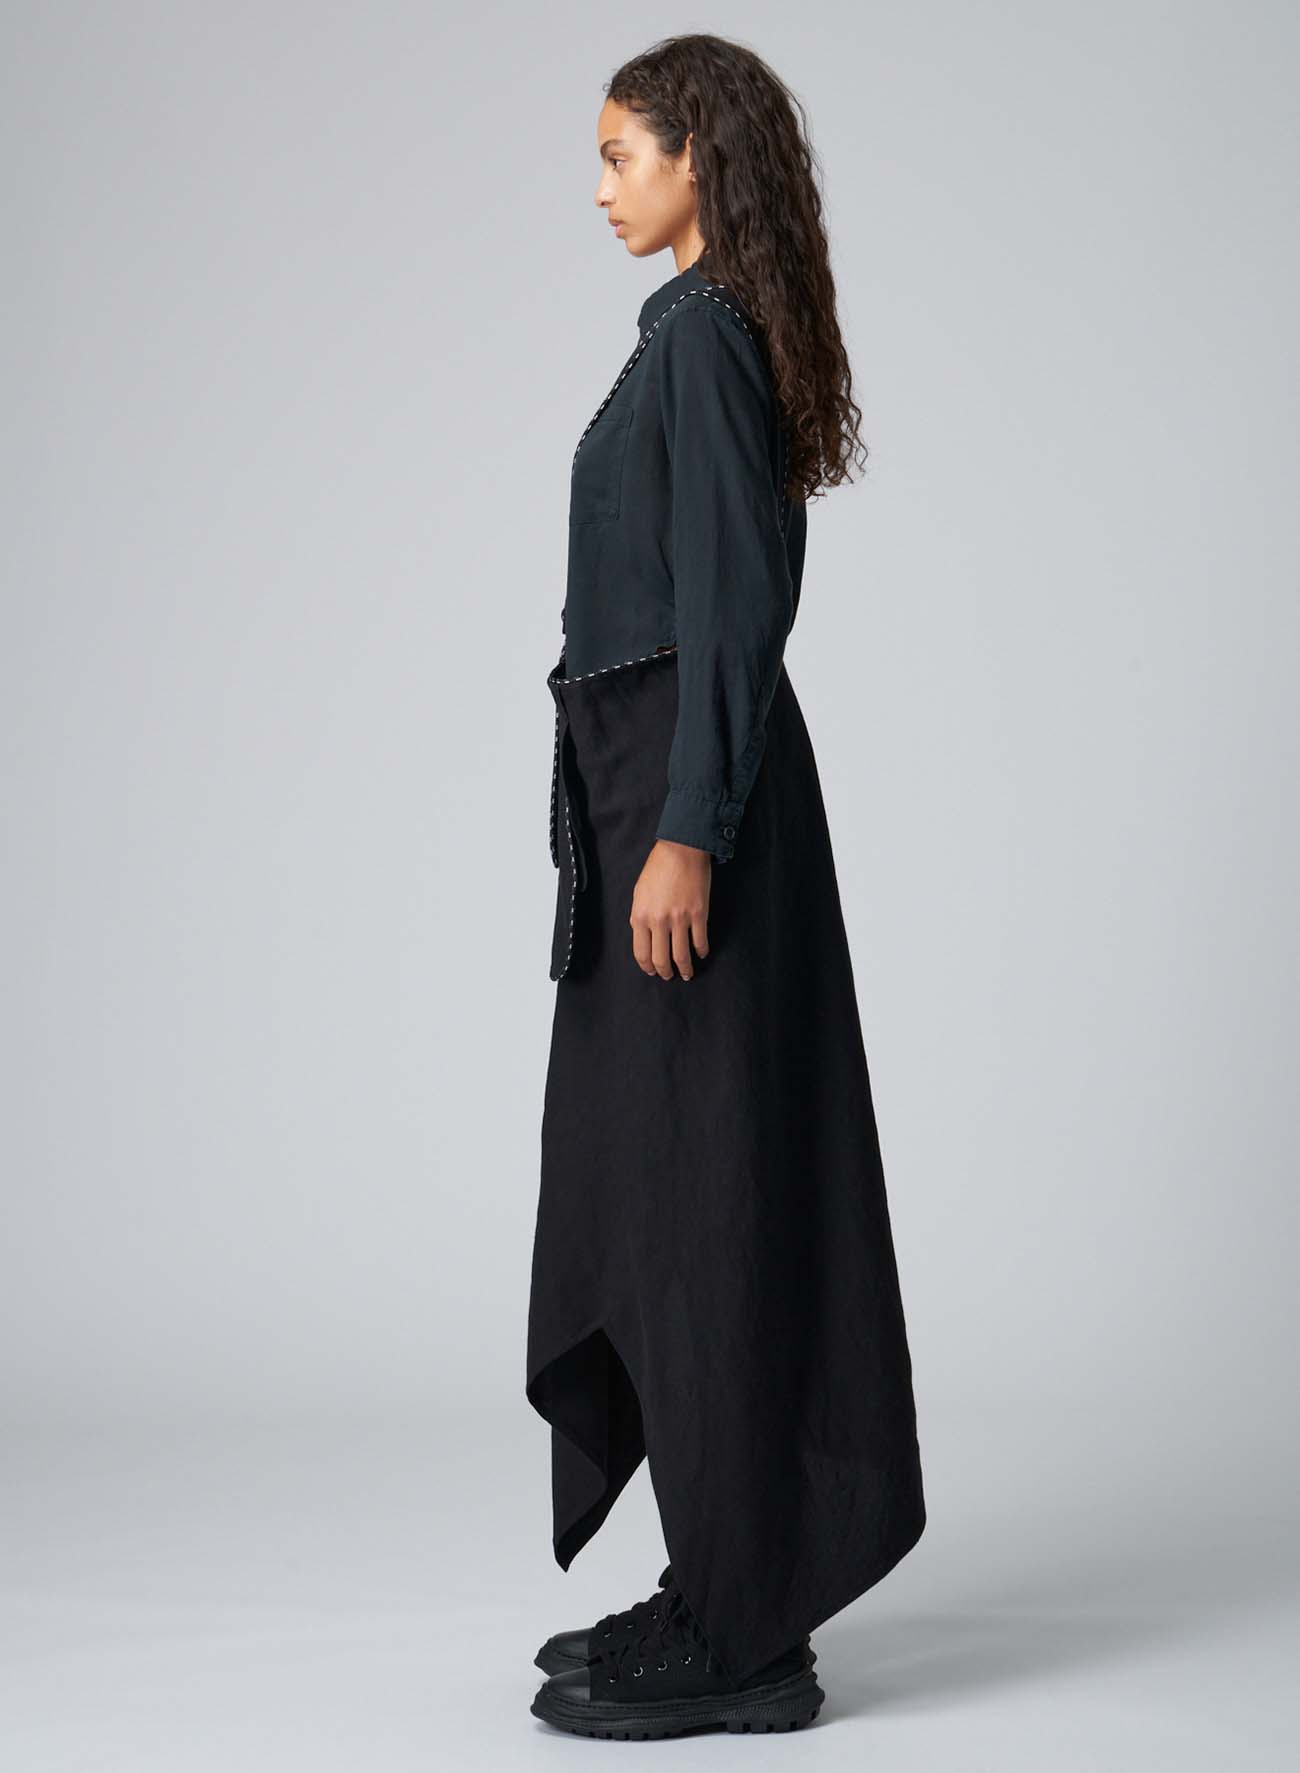 LINEN/RAYON CANVAS ASYMMETRIC SKIRT WITH SHOULDER STRAP